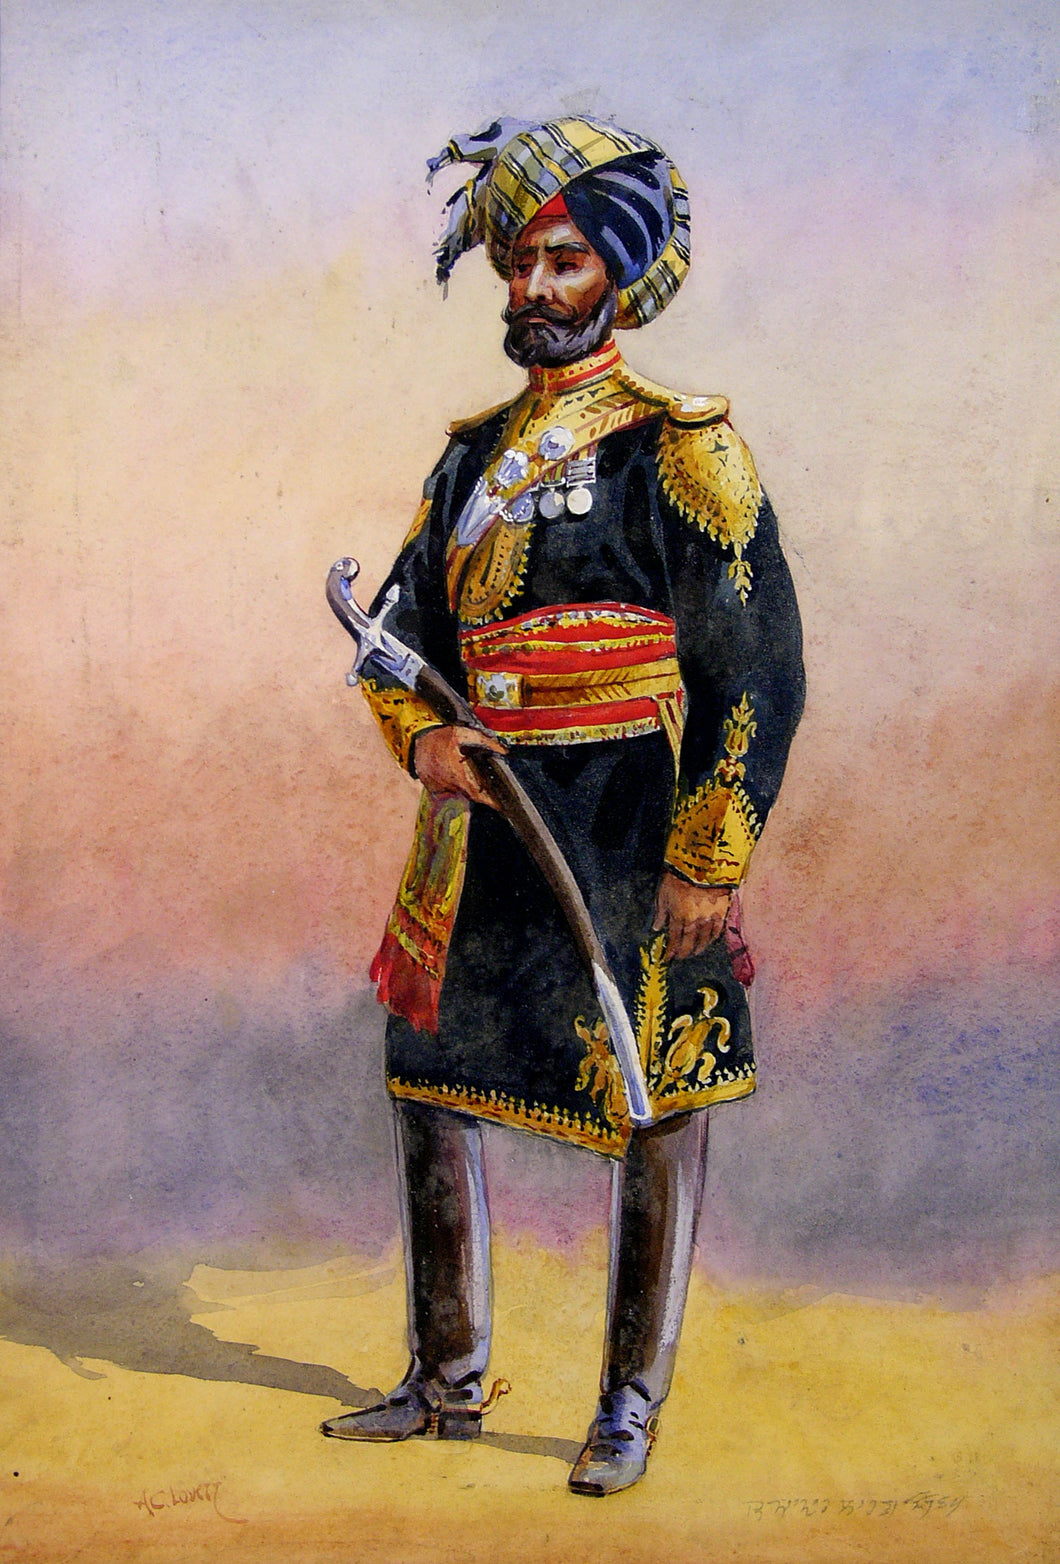 Indian Officer of 11th King Edward's Own Lancers (Probyn's Horse) by Major A.C. Lovett, cCirca 1910